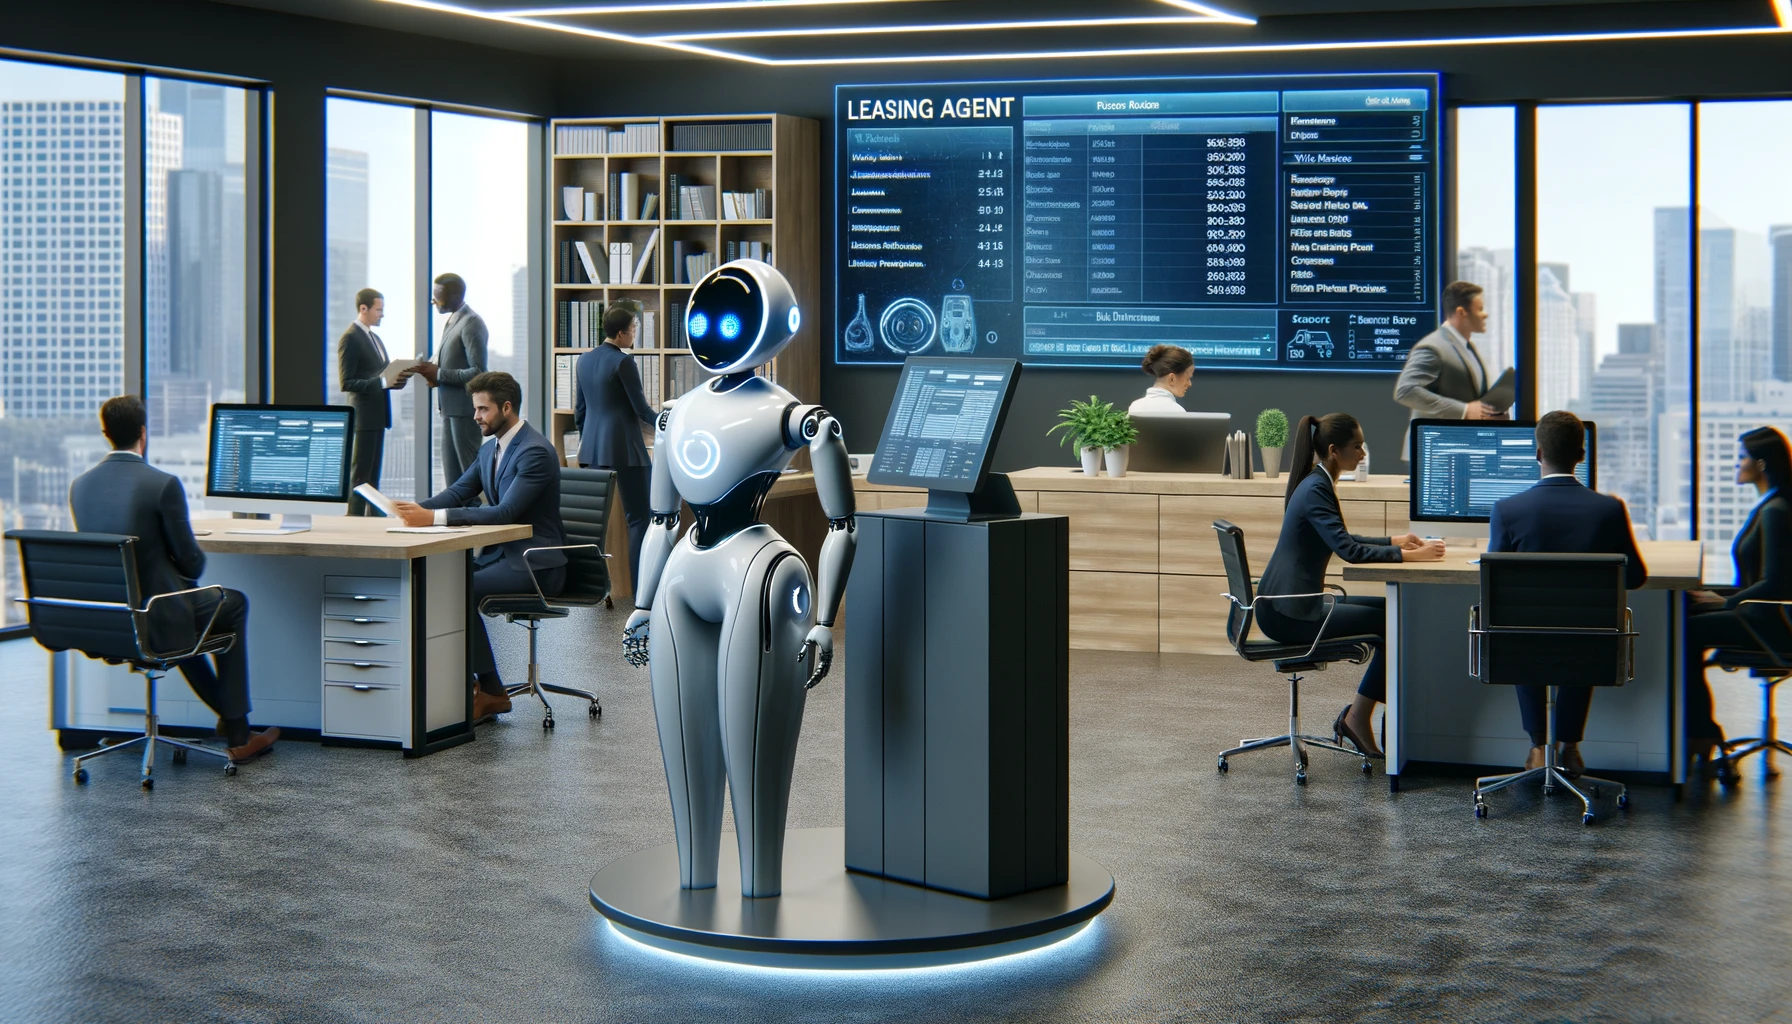 A modern office setting with a sleek AI leasing agent robot assisting customers with paperwork, showcasing how efficiency and workload reduction can be achieved in real estate management through advanced technology.